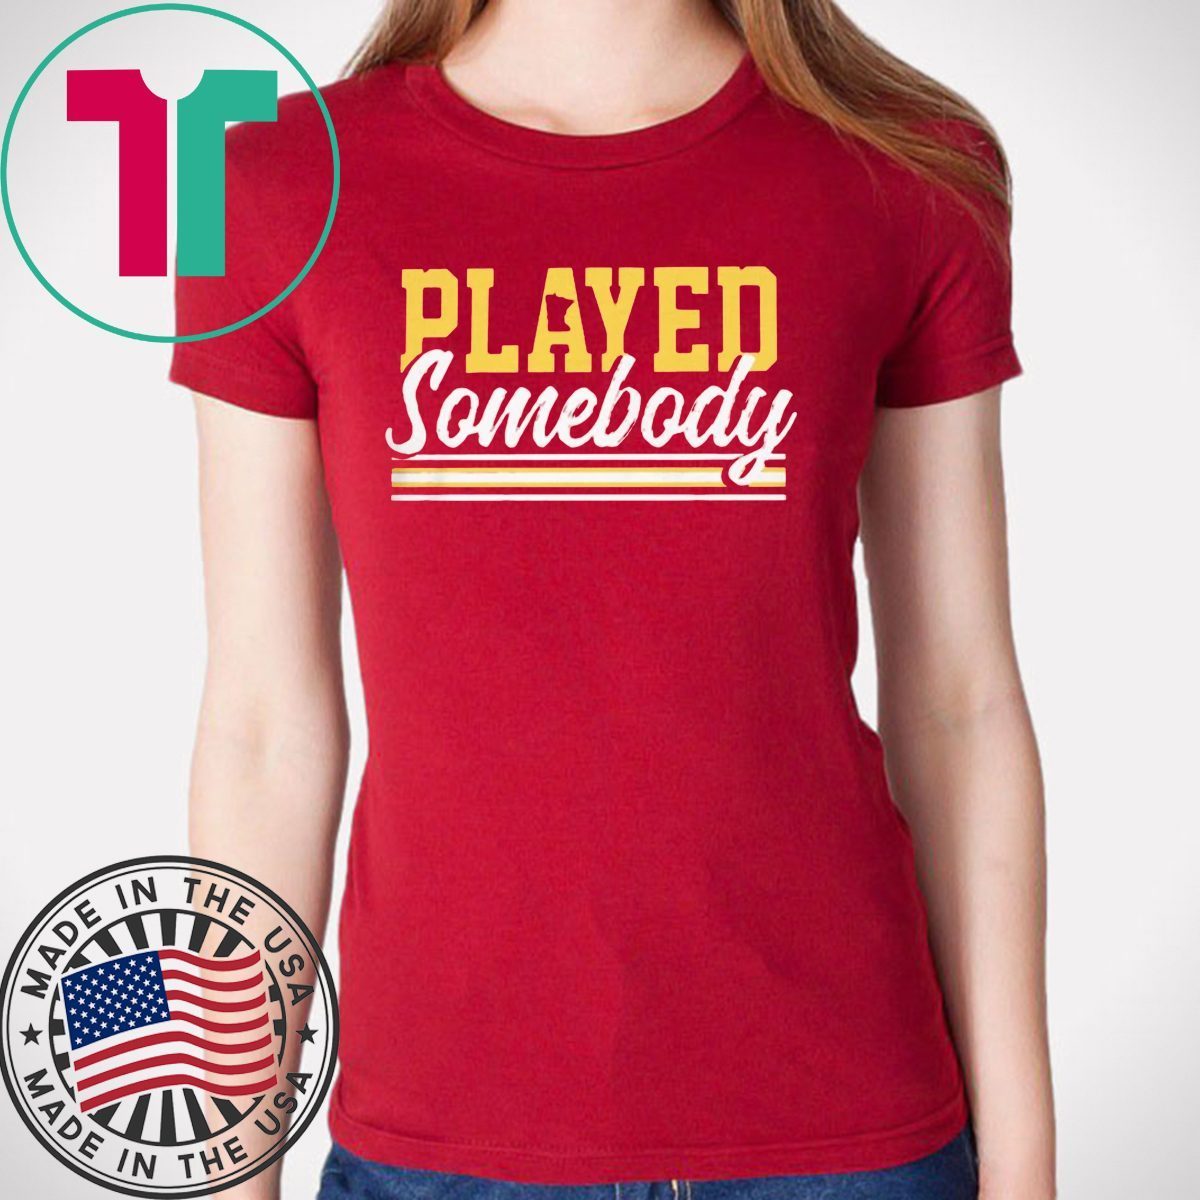 PLAYED SOMEBODY SHIRT - OrderQuilt.com